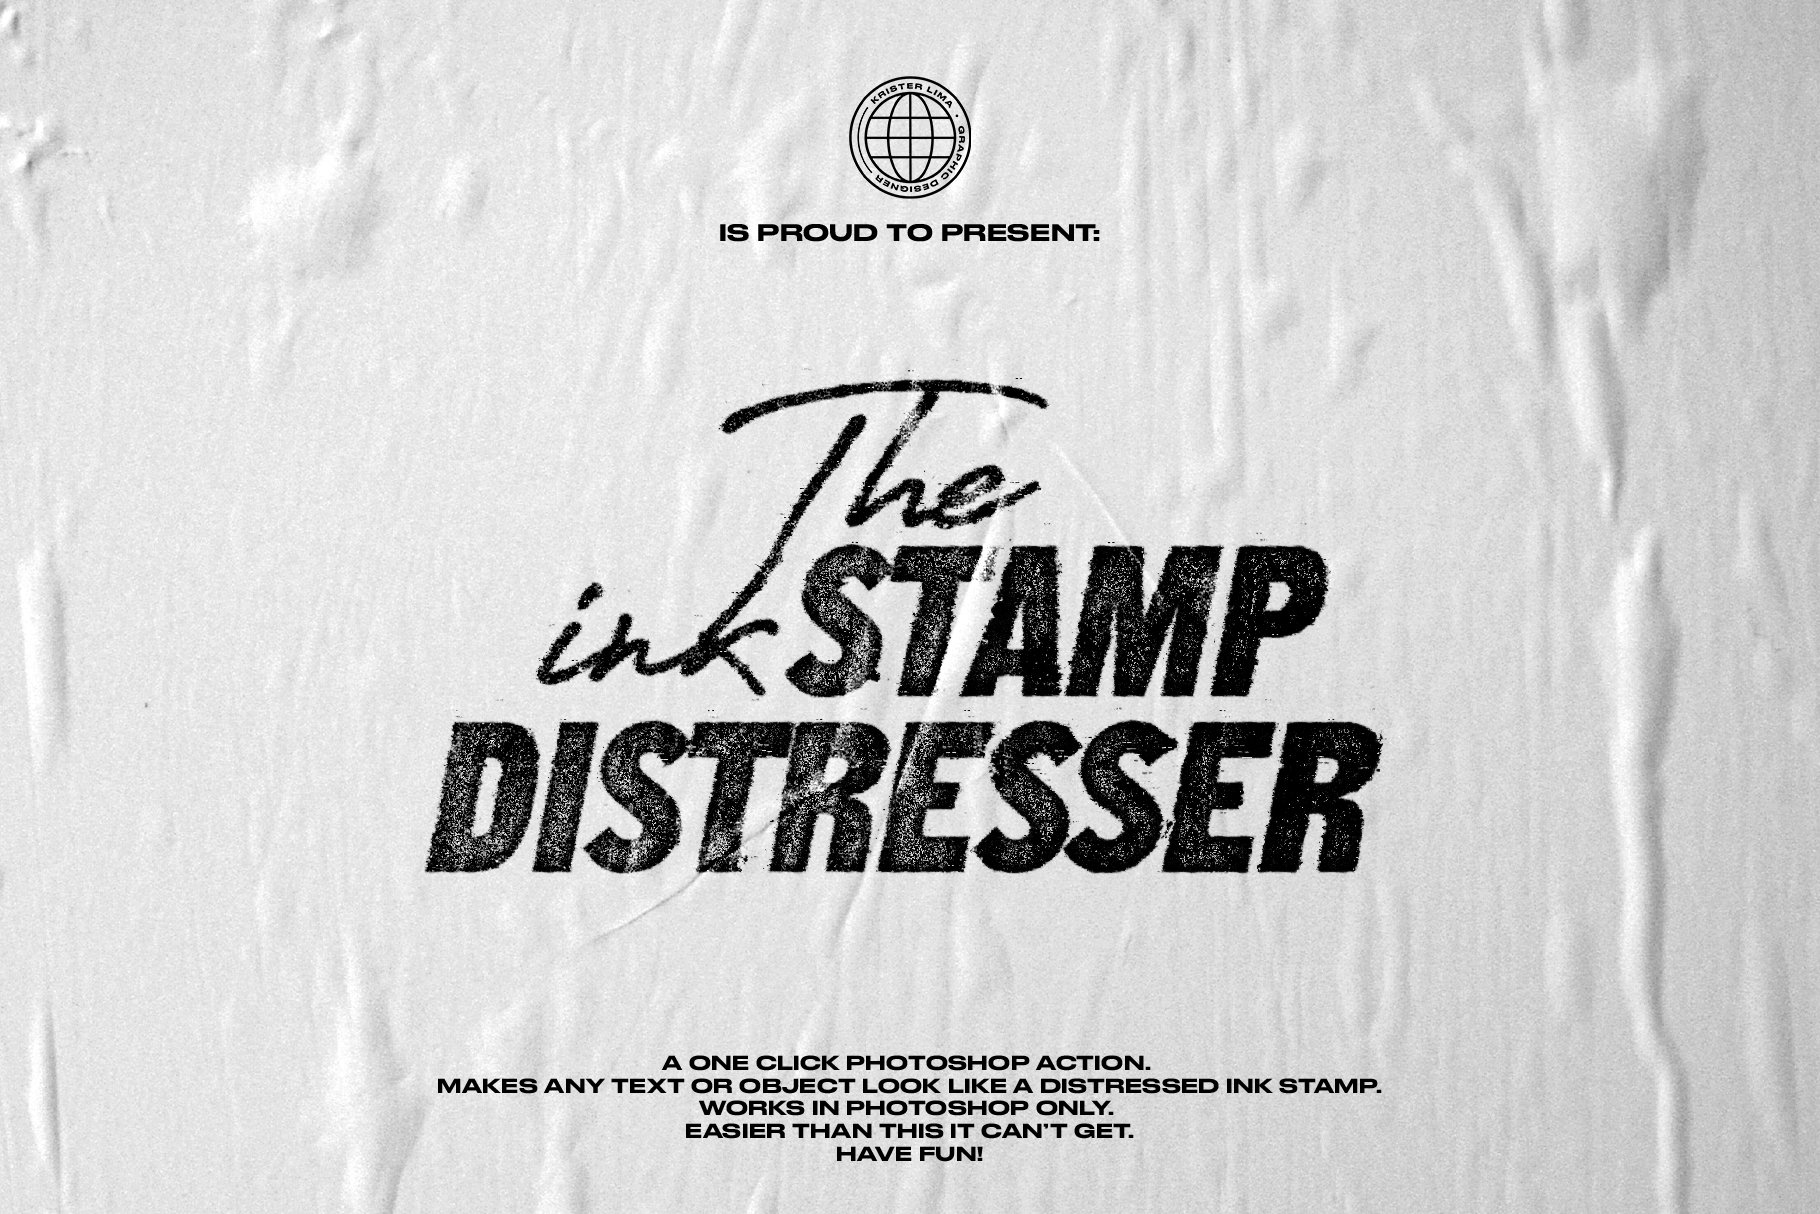 The Ink Stamp Distresser - One Clickcover image.